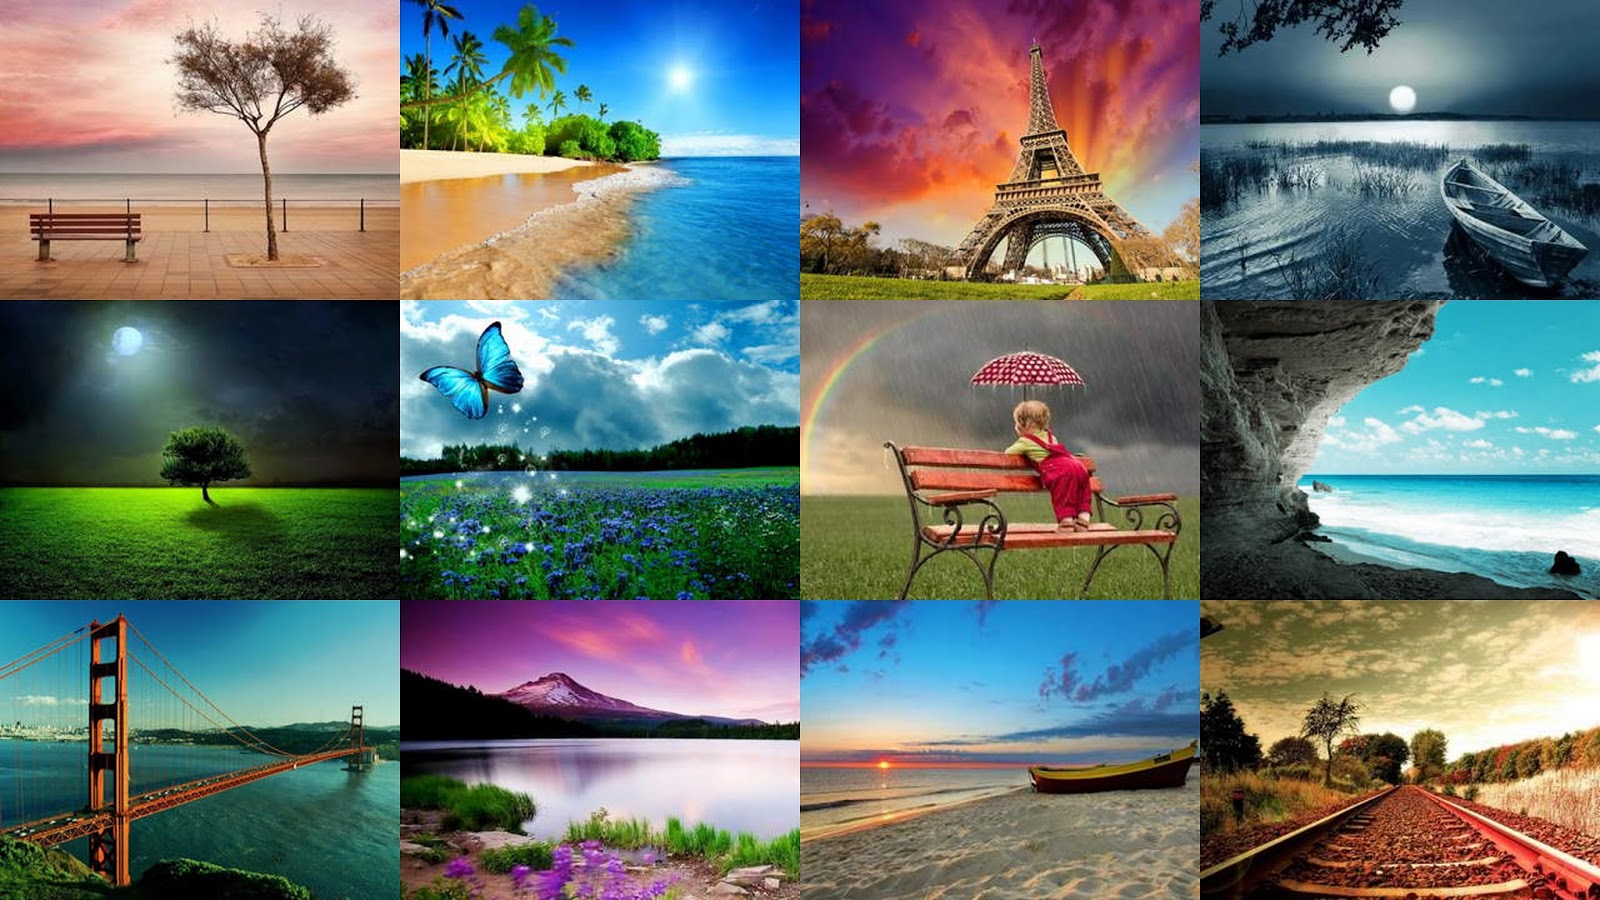 Free download Download 320x240 Nature Wallpapers Pack Pack Contains 100